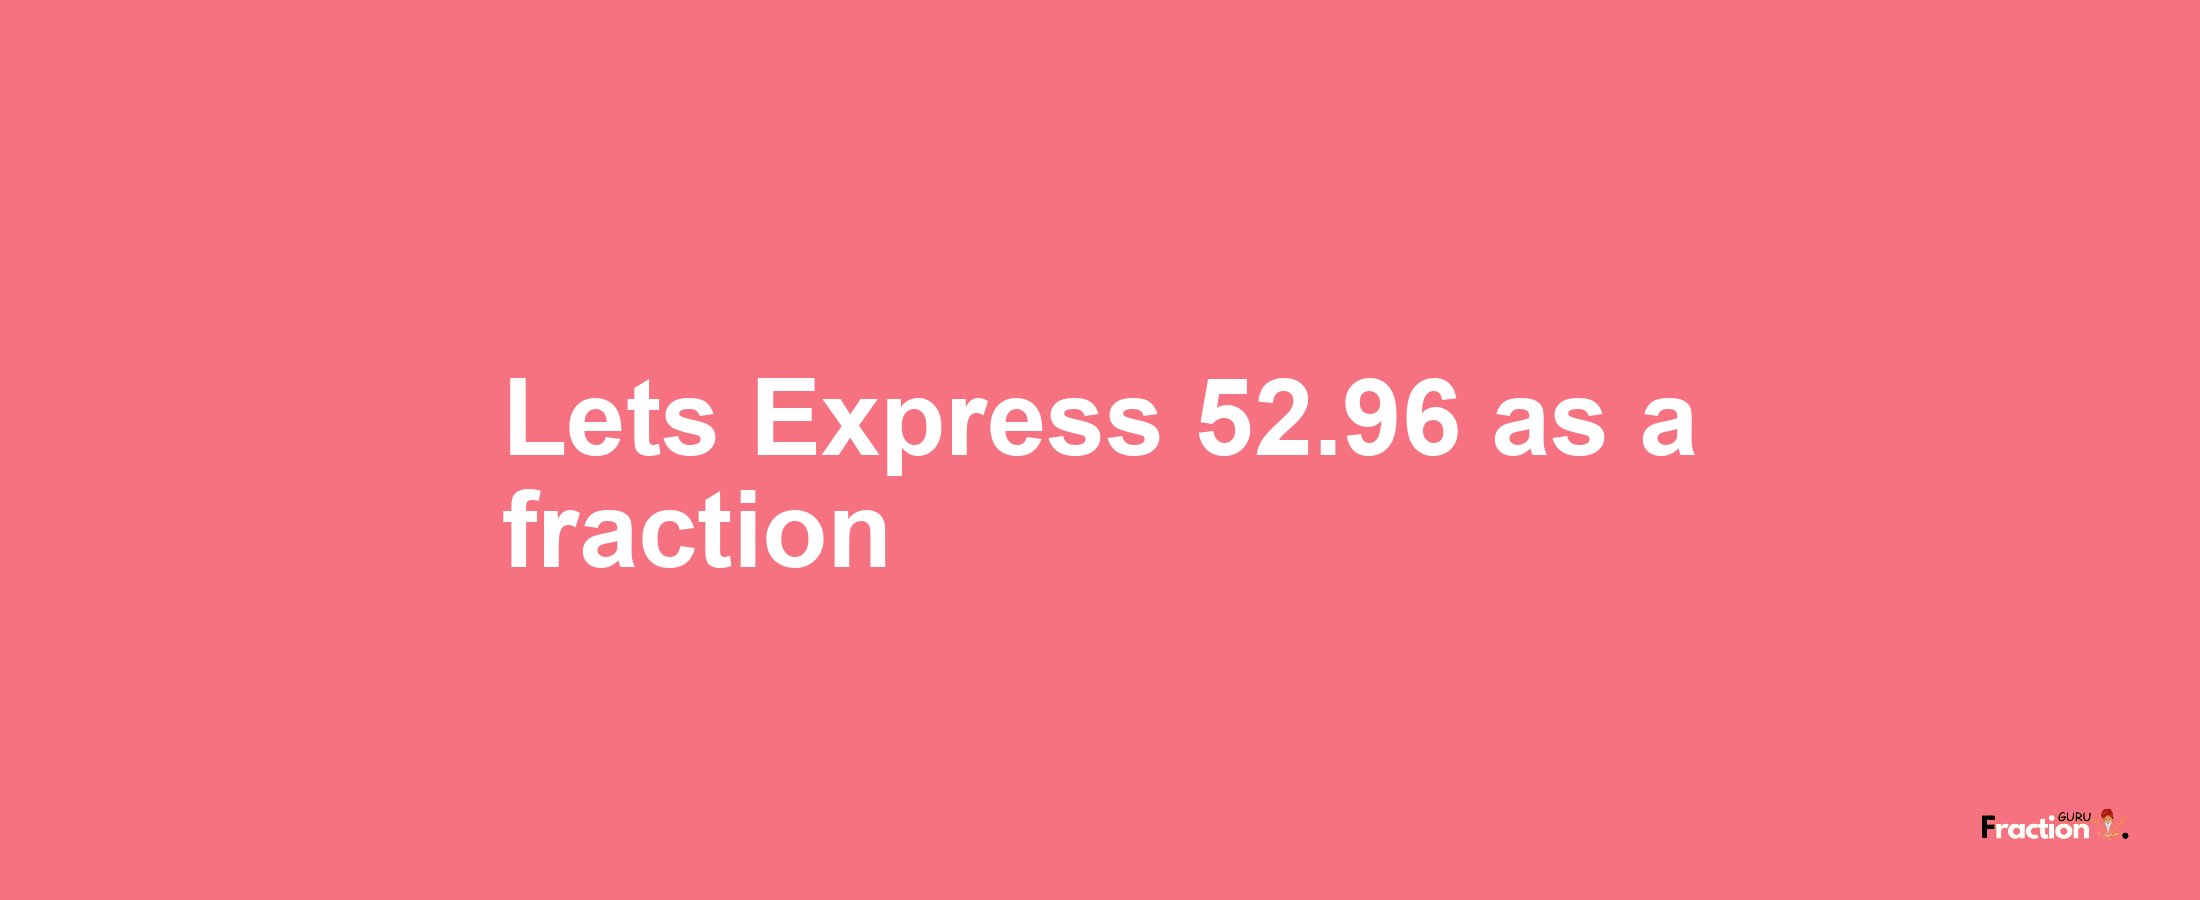 Lets Express 52.96 as afraction